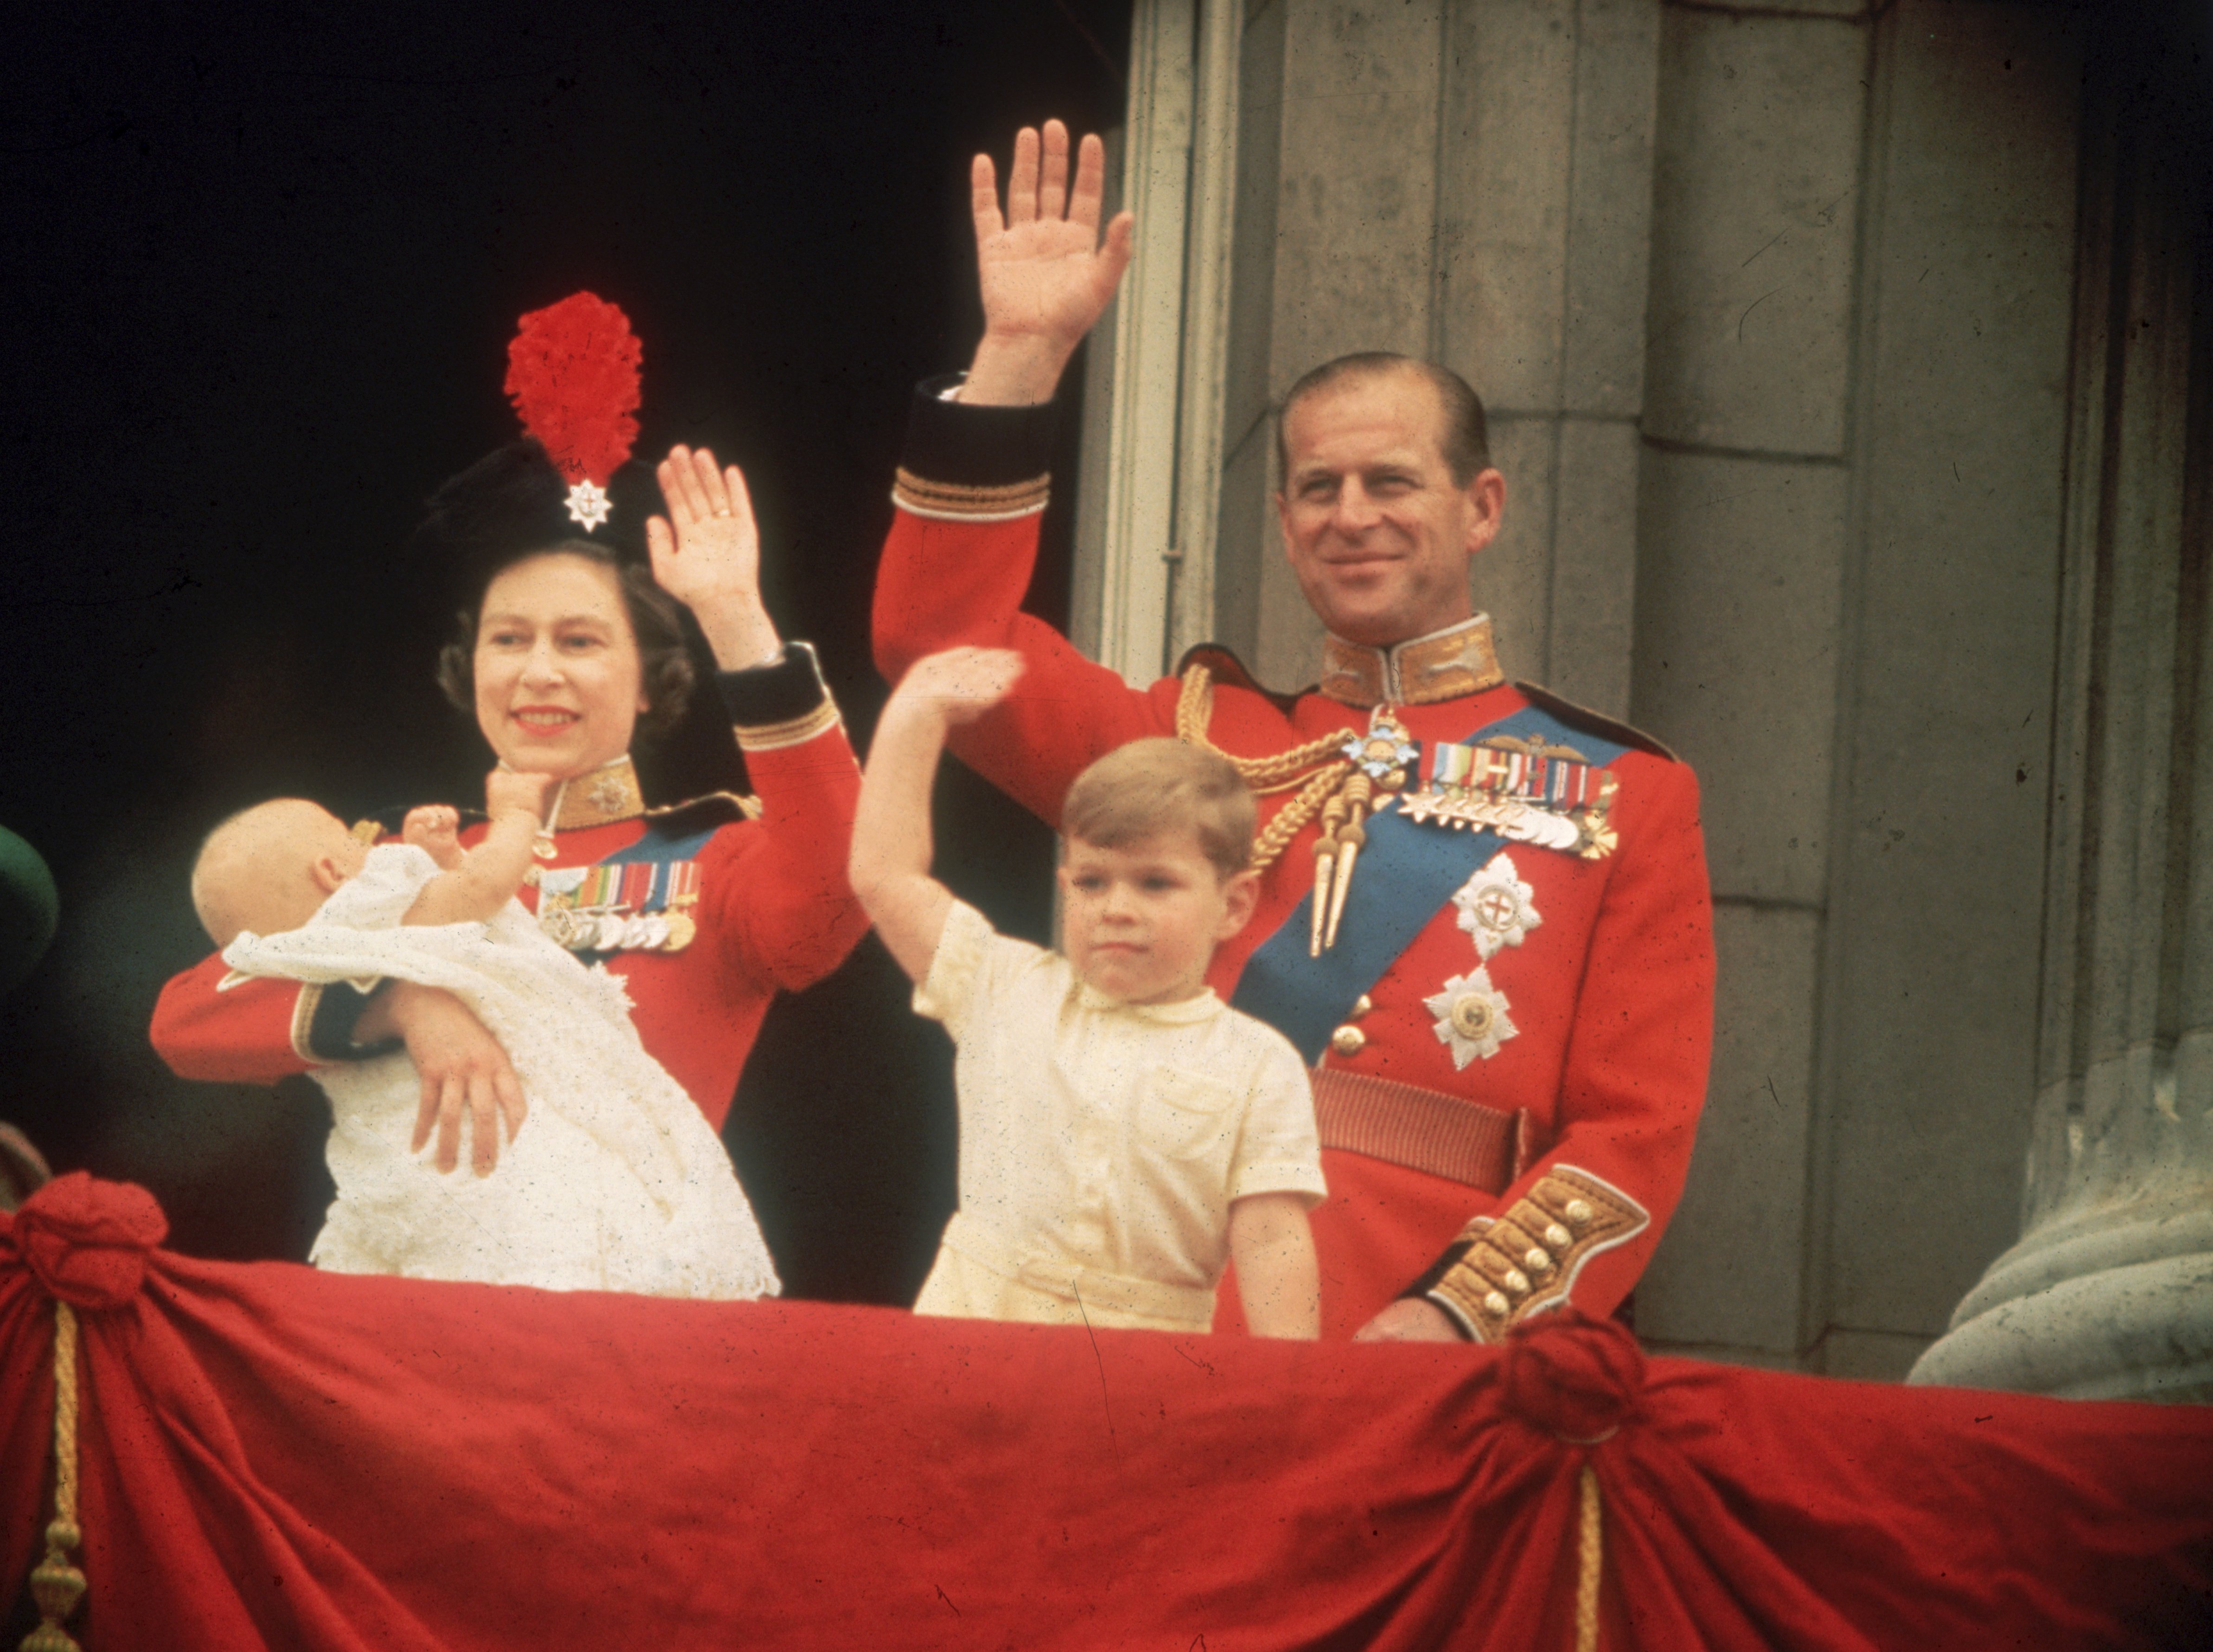 Queen Elizabeth, Prince Philip, Prince Andrew and Prince Edward waving to the crowds from the balcony at Buckingham Palace, during the Trooping of the Colour. | Source: Fox Photos/Getty Images